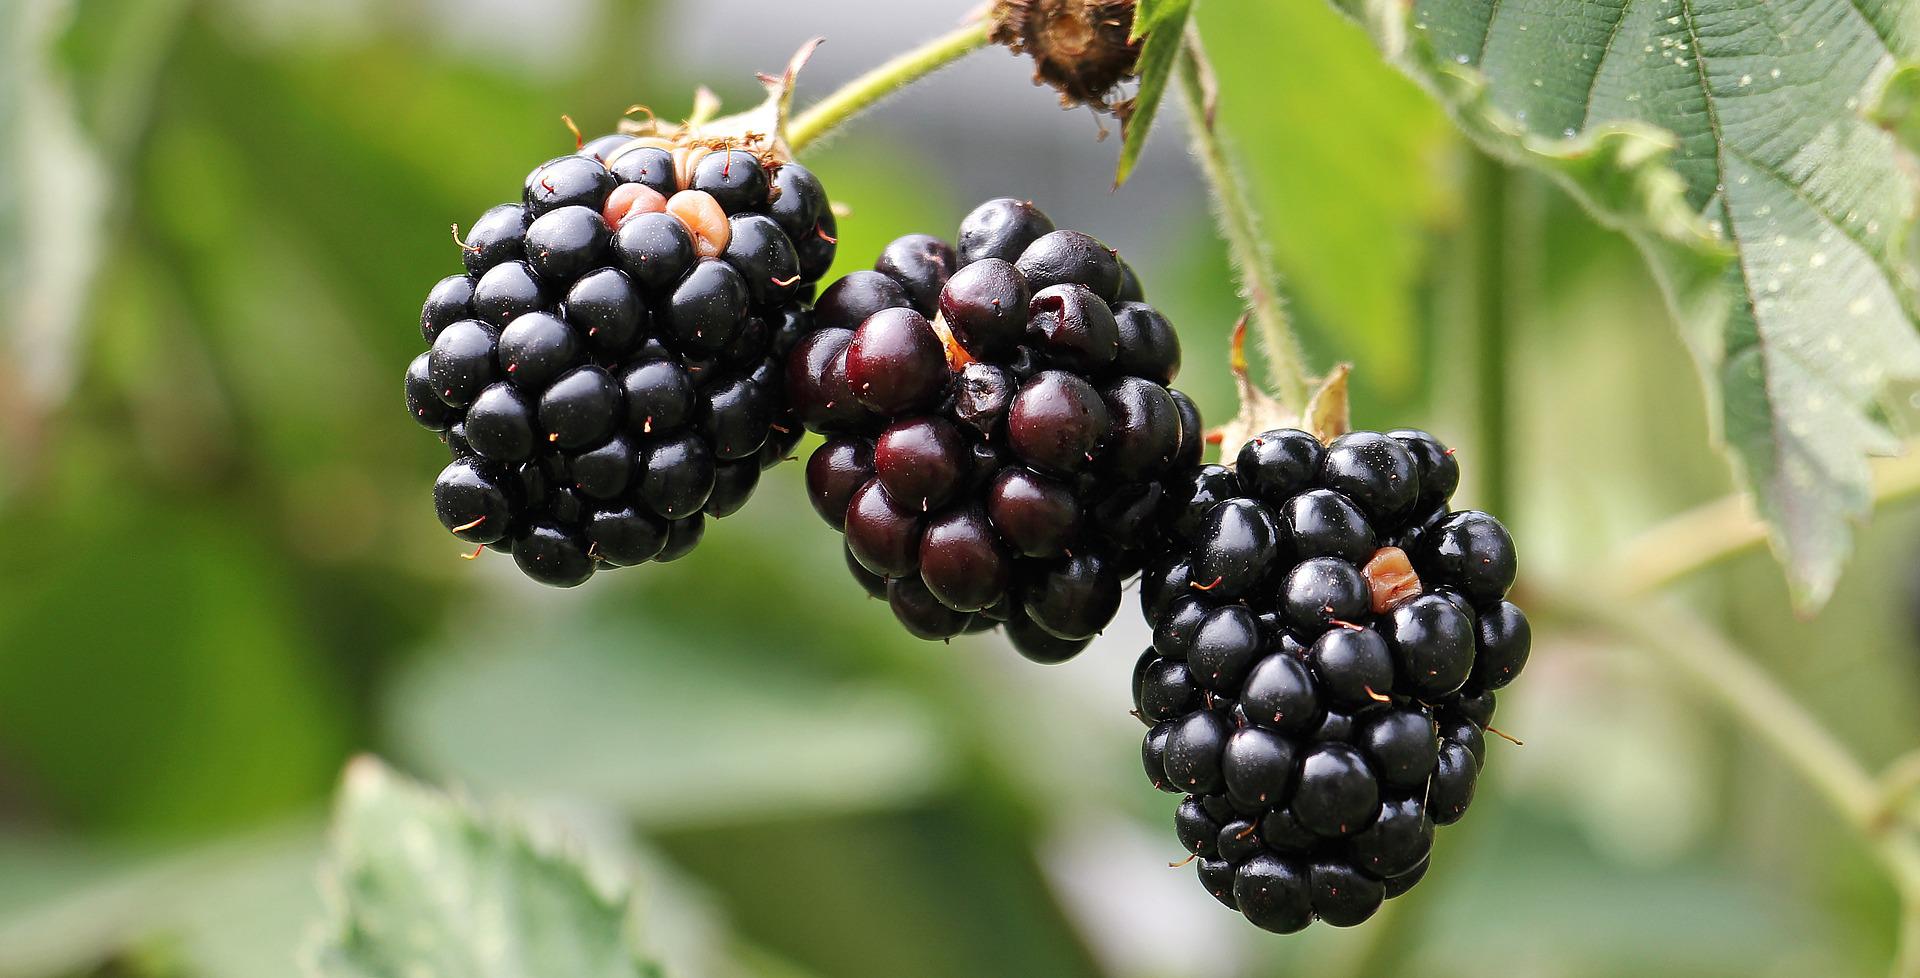 Blackberry Farming: How to Plant, Grow and Harvest